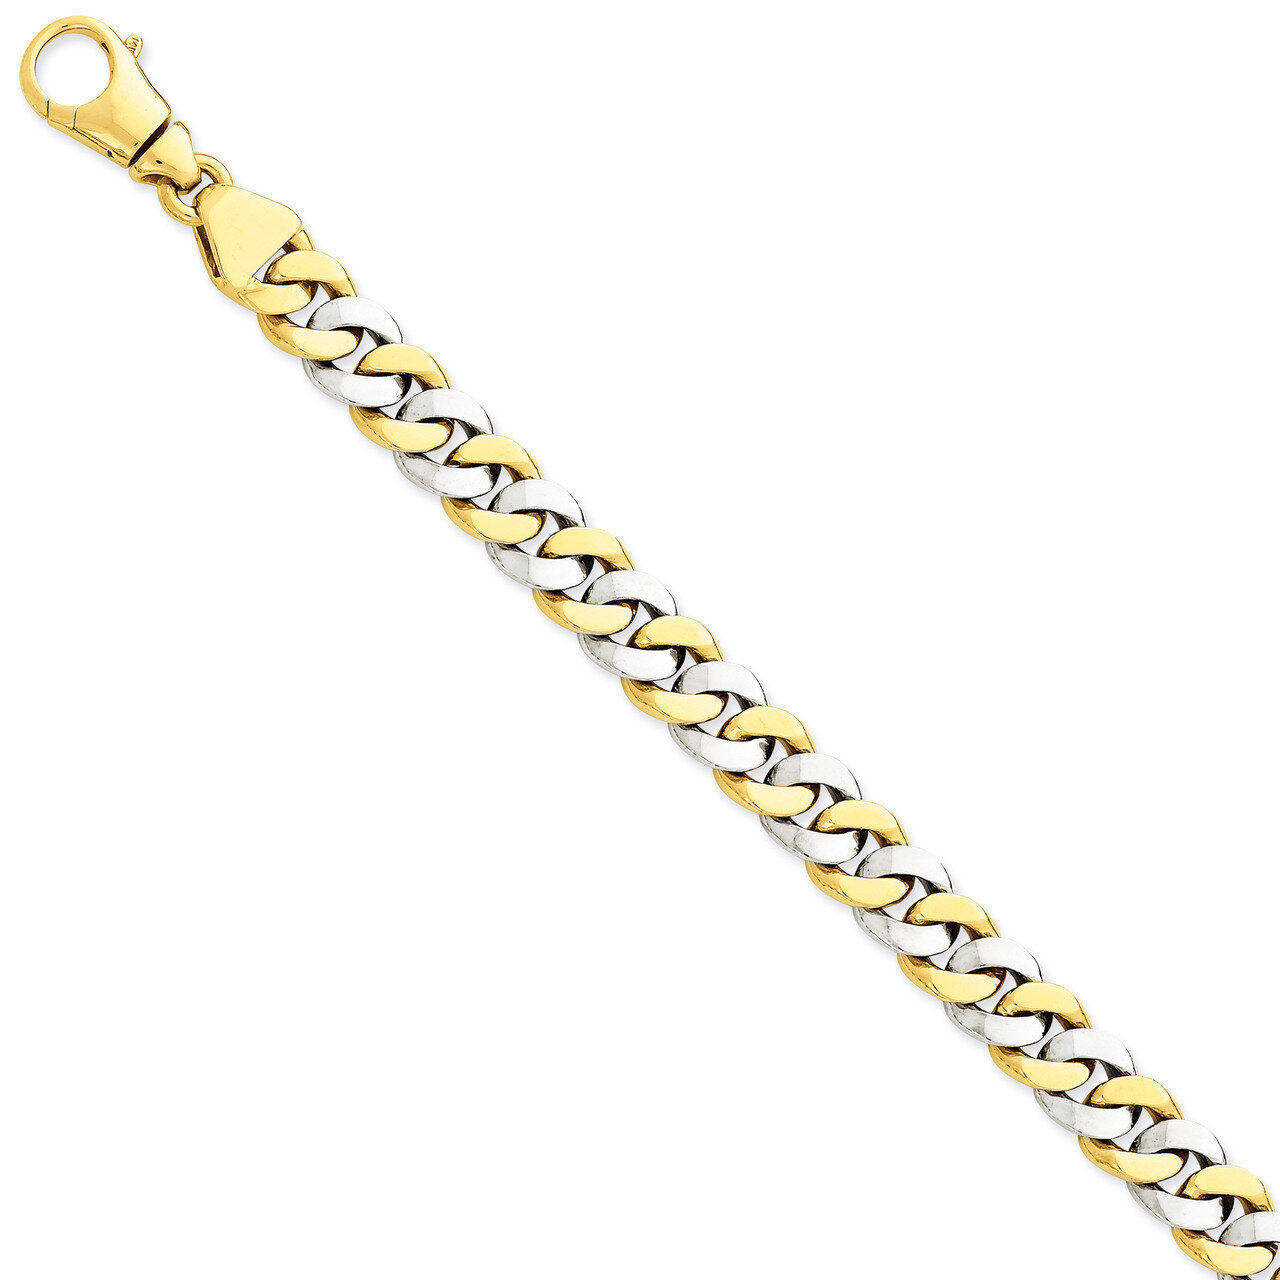 10.1mm Polished Fancy Link Chain 24 Inch 14k Two-Tone Gold LK514-24